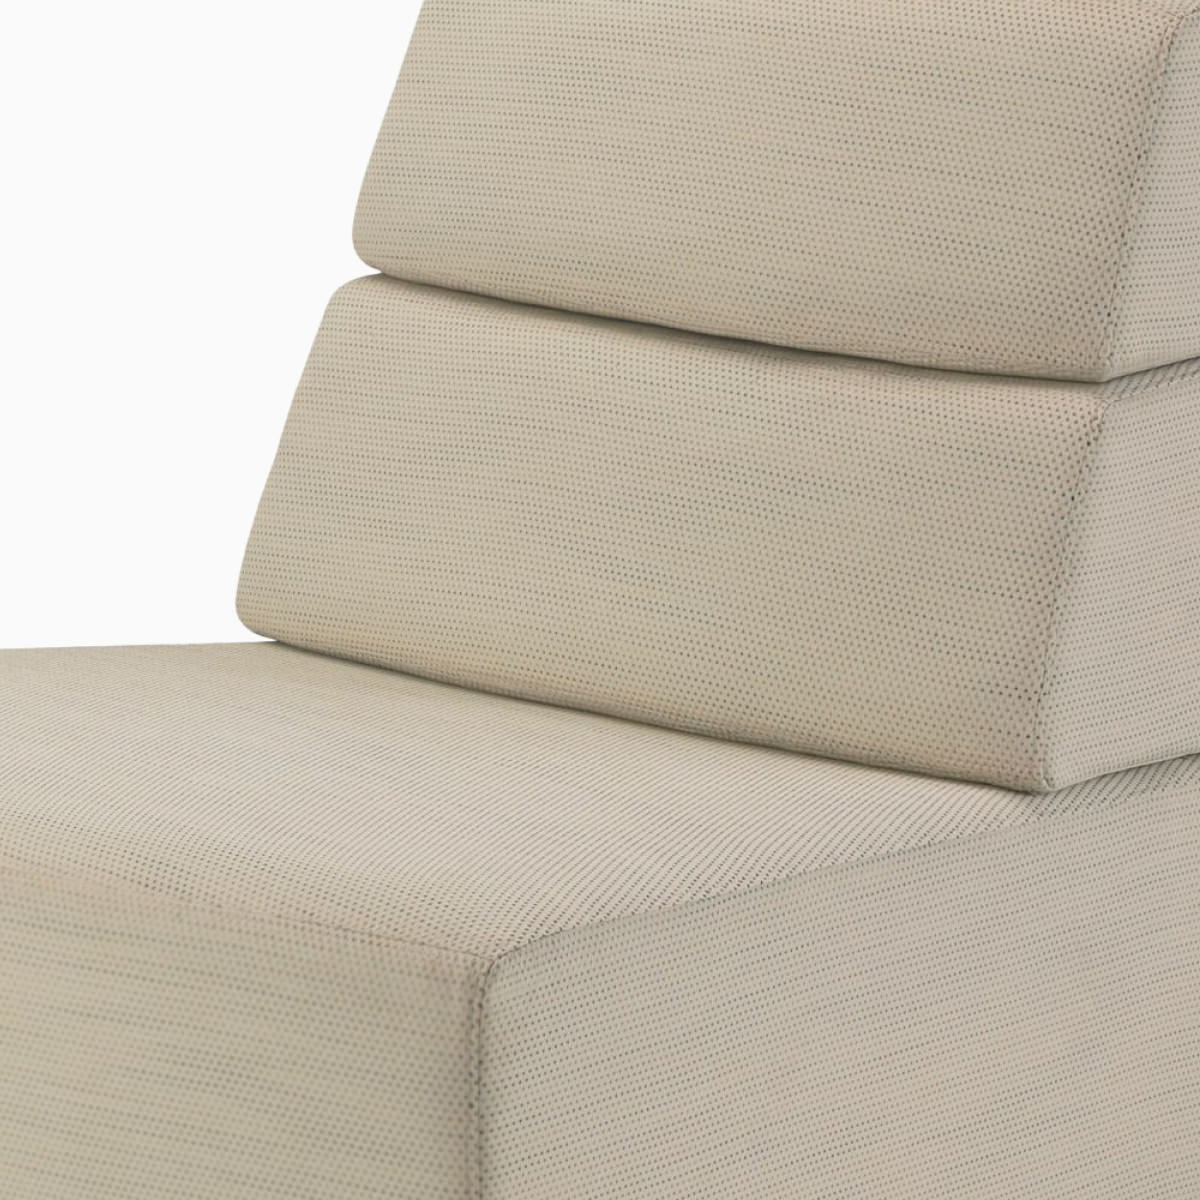 Close-up of Nemschoff Steps Lounge System seating showing removable covers.